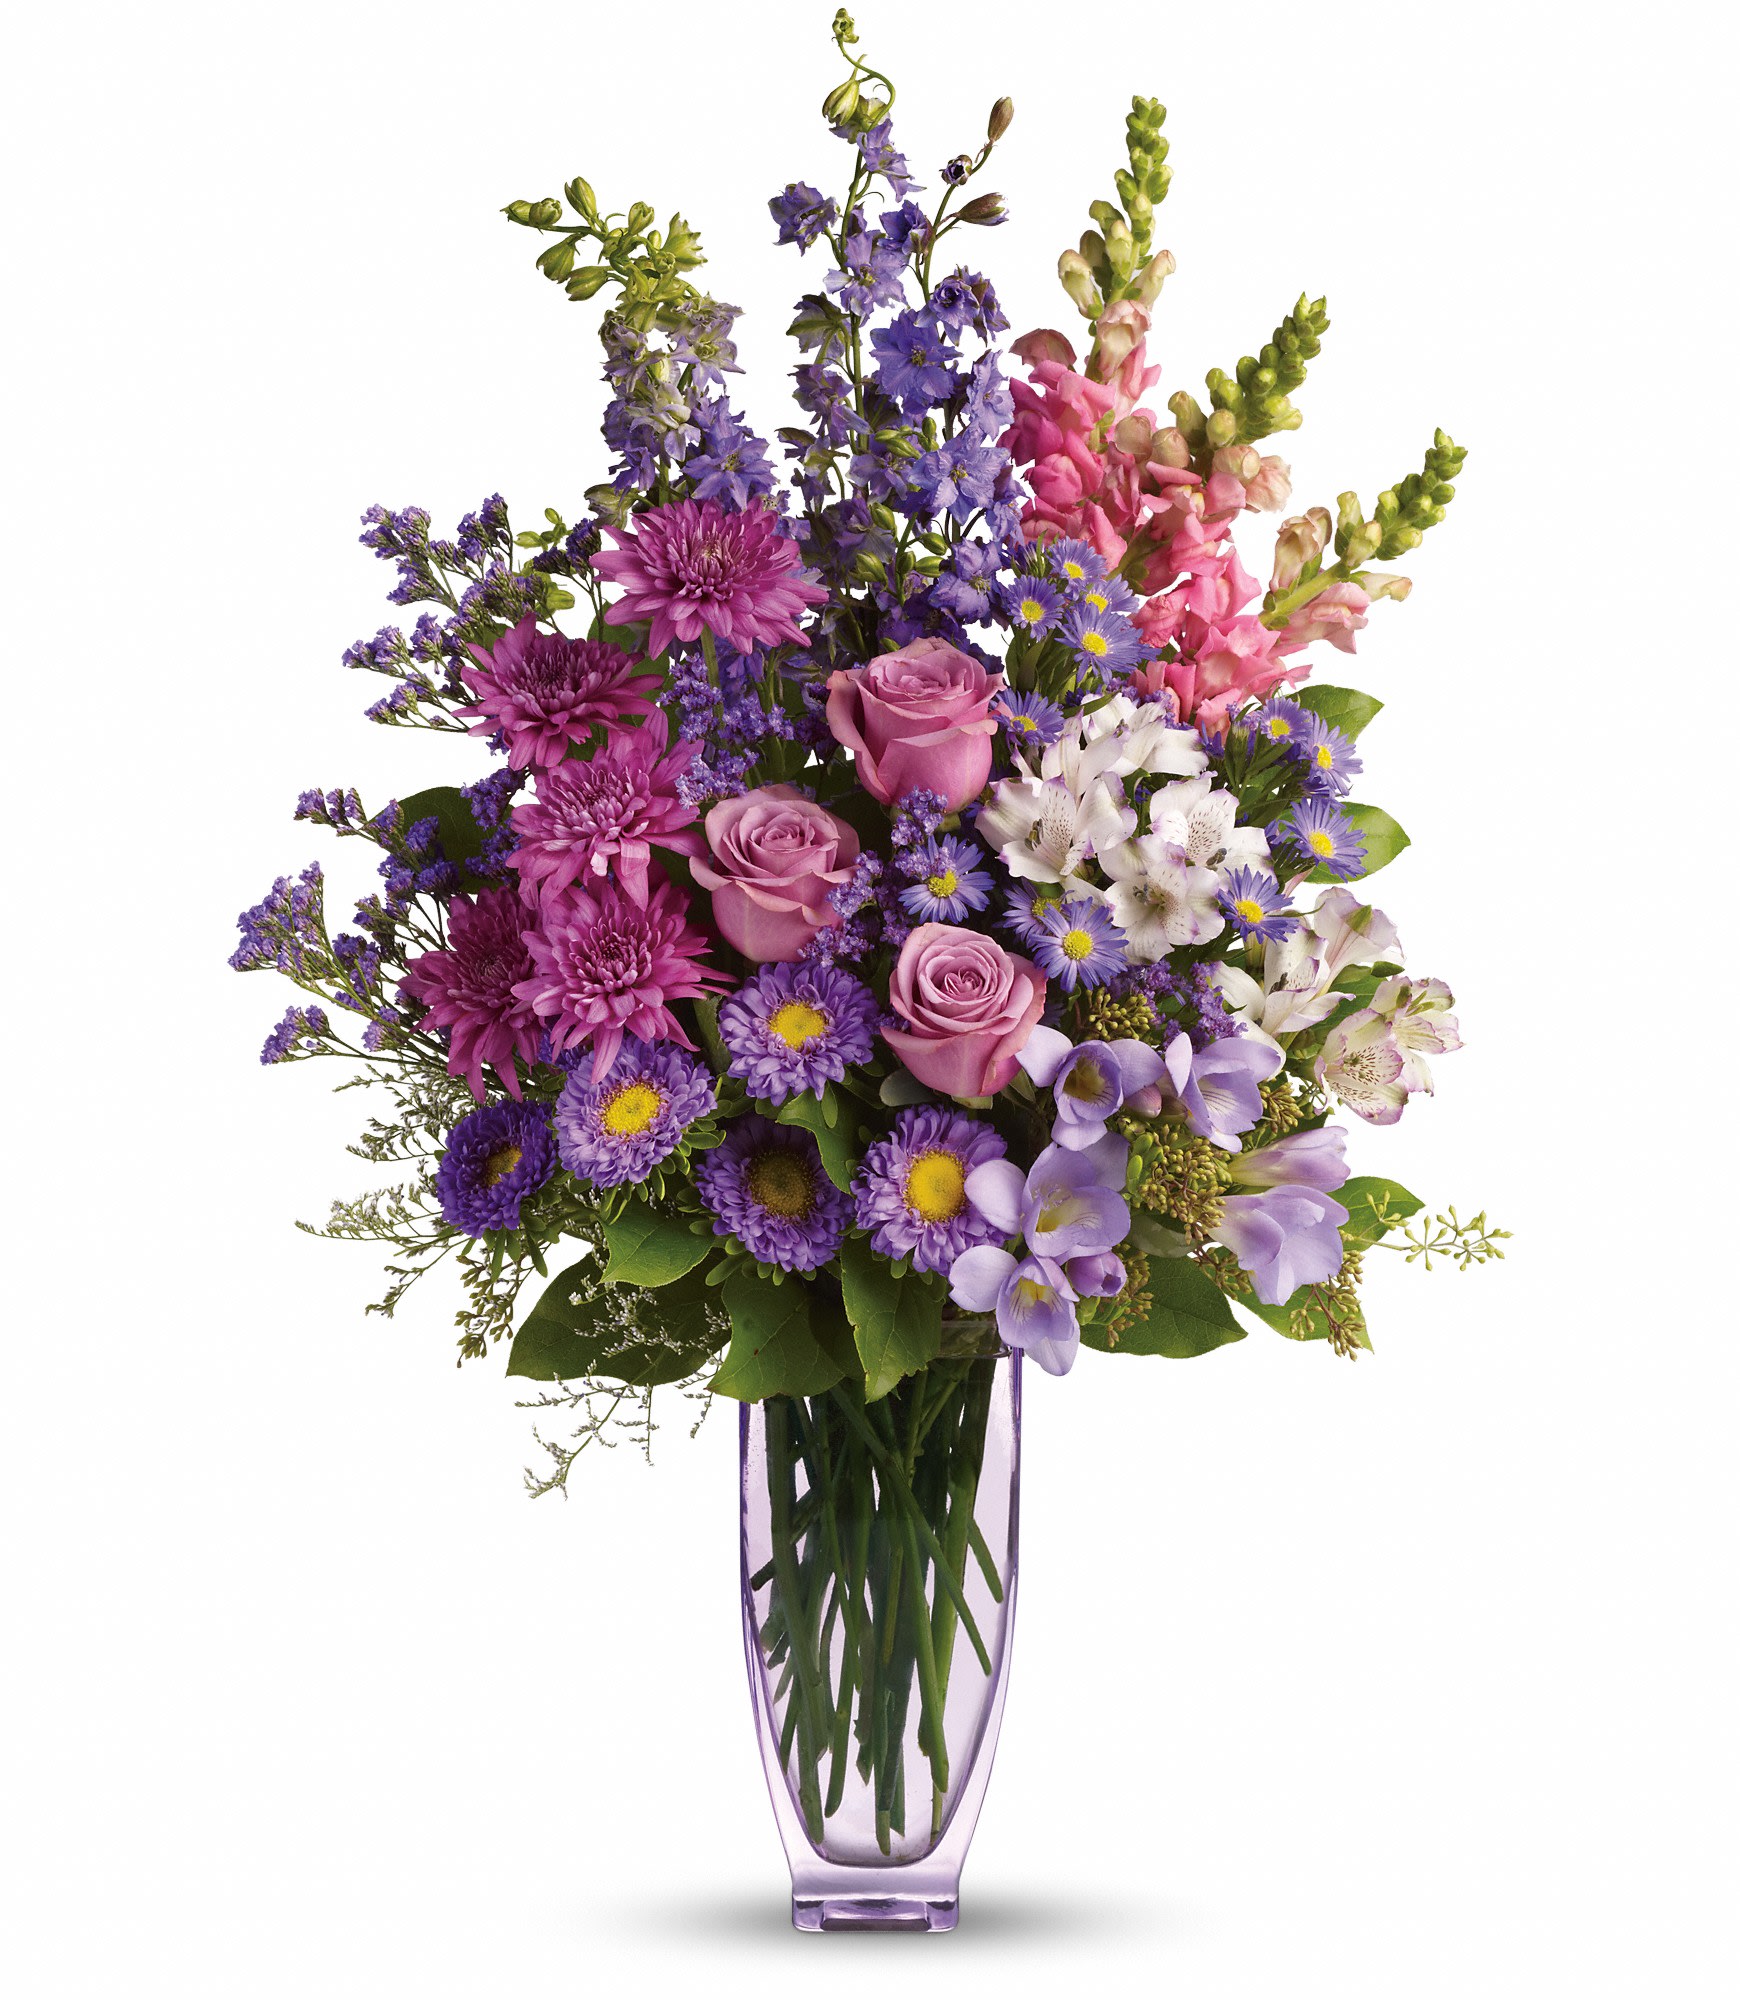 Steal The Show  - You won't have to worry about any other bouquet upstaging this gift! At over two feet tall, this is a fabulous way to show someone how much they mean to you.  Also lovely to send for bereavement. Call for other color options.Actual vase may vary.